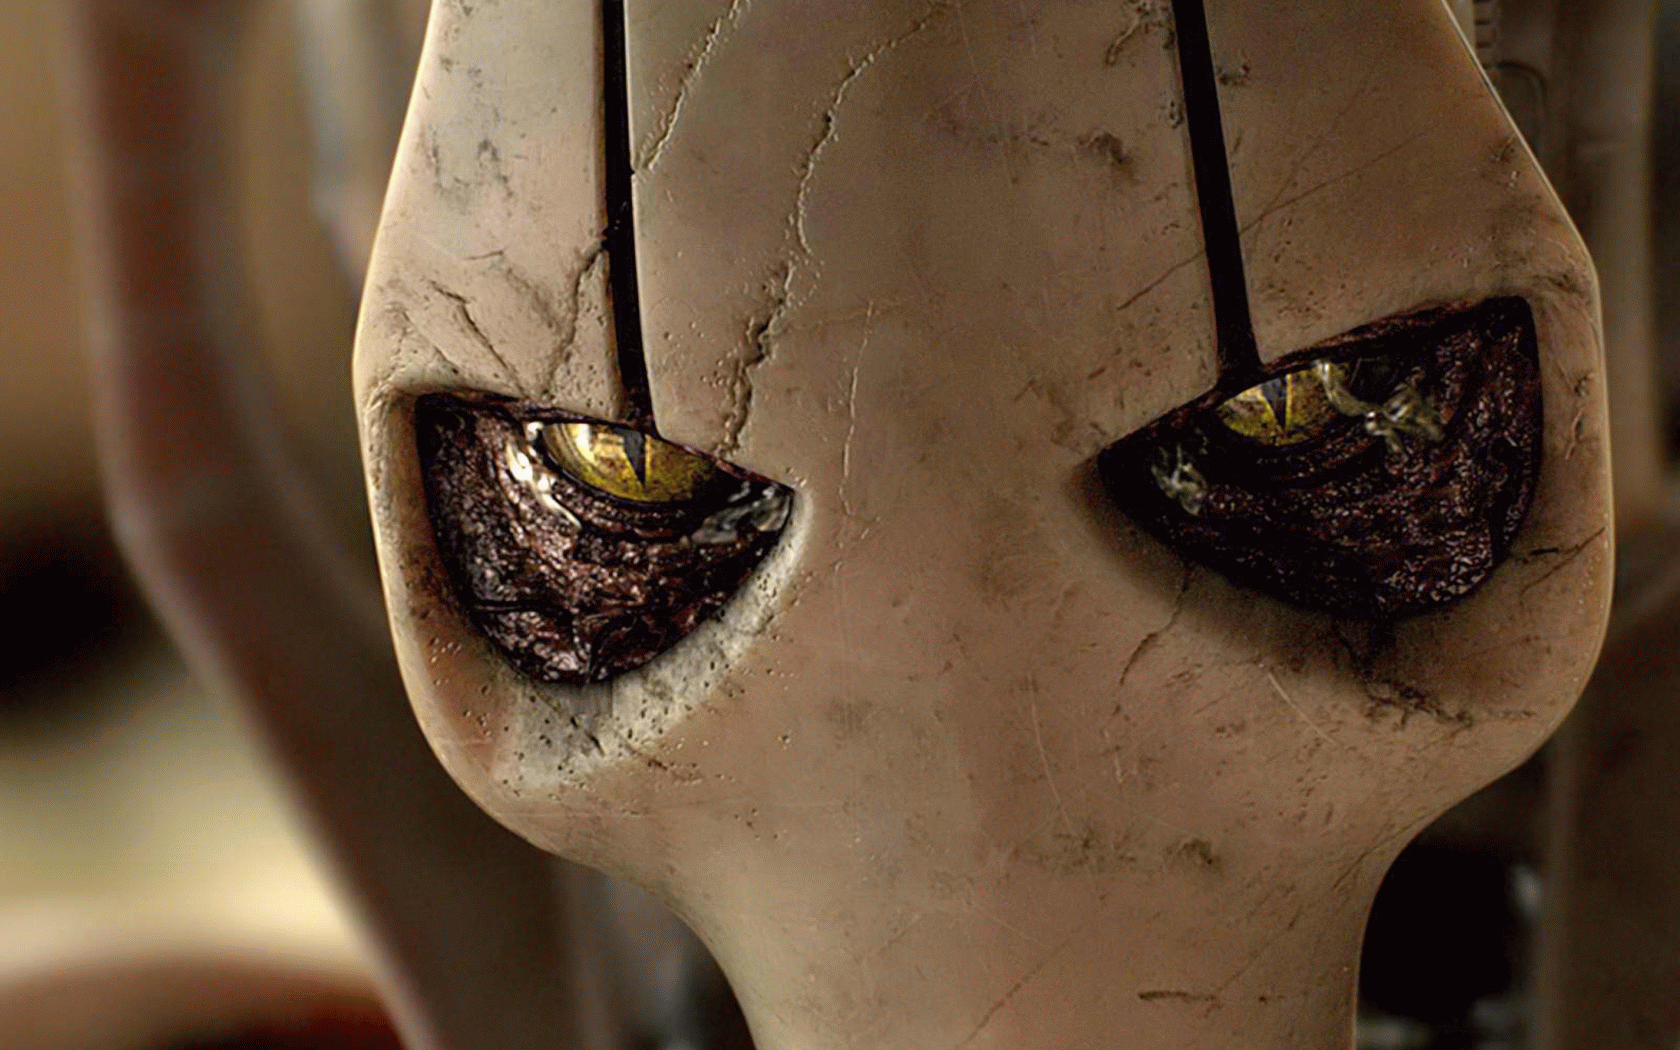 General Grievous Star Wars Villains Movies Star Wars Episode Iii The Revenge Of The Sith Eyes 1680x1050